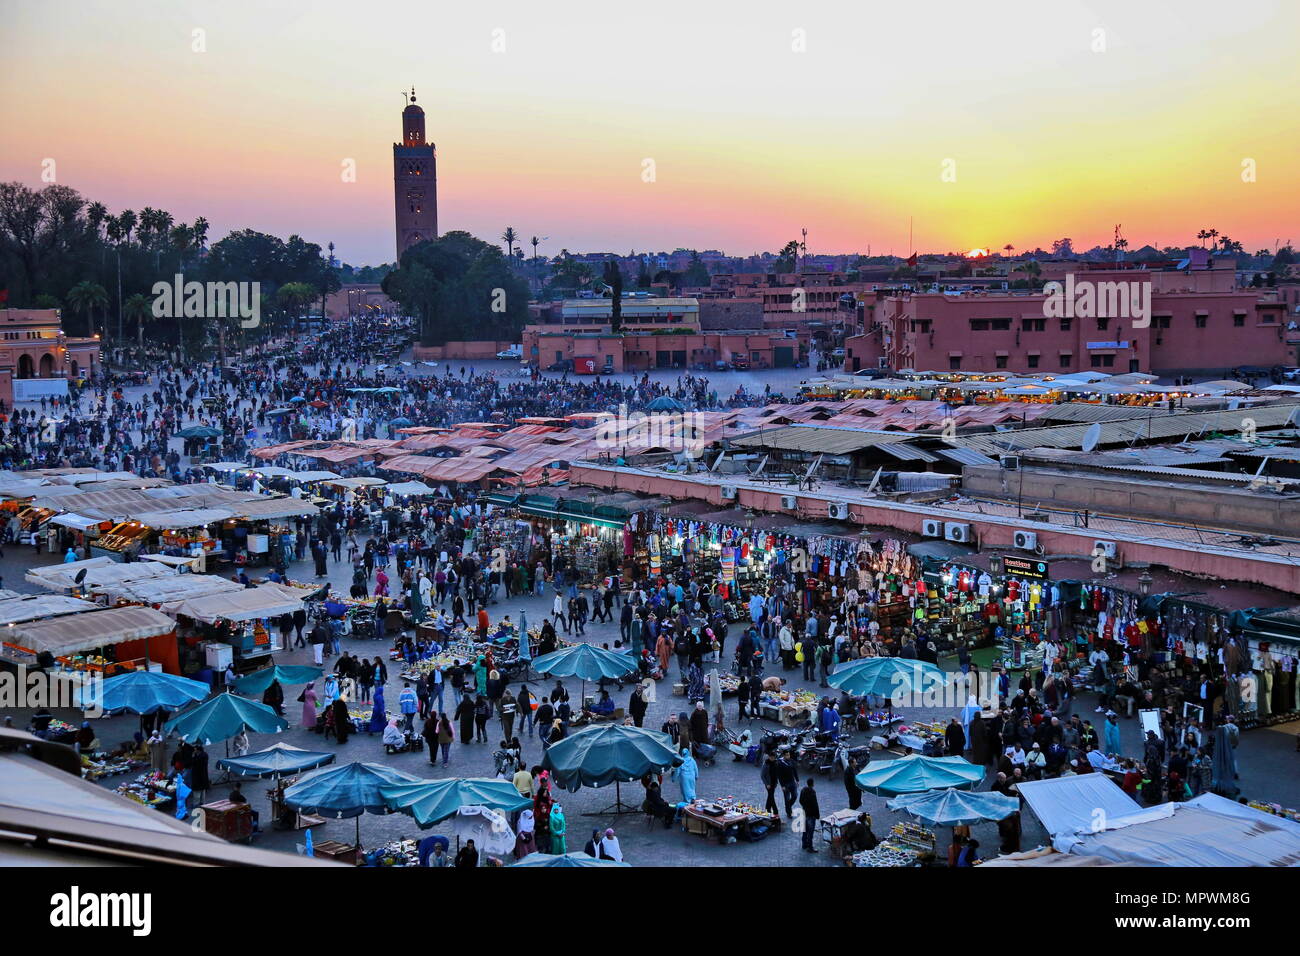 MARRAKECH, MOROCCO - 7 March 2016: Famous Jemaa el Fna square crowded at dusk. Marrakesh, Morocco Stock Photo